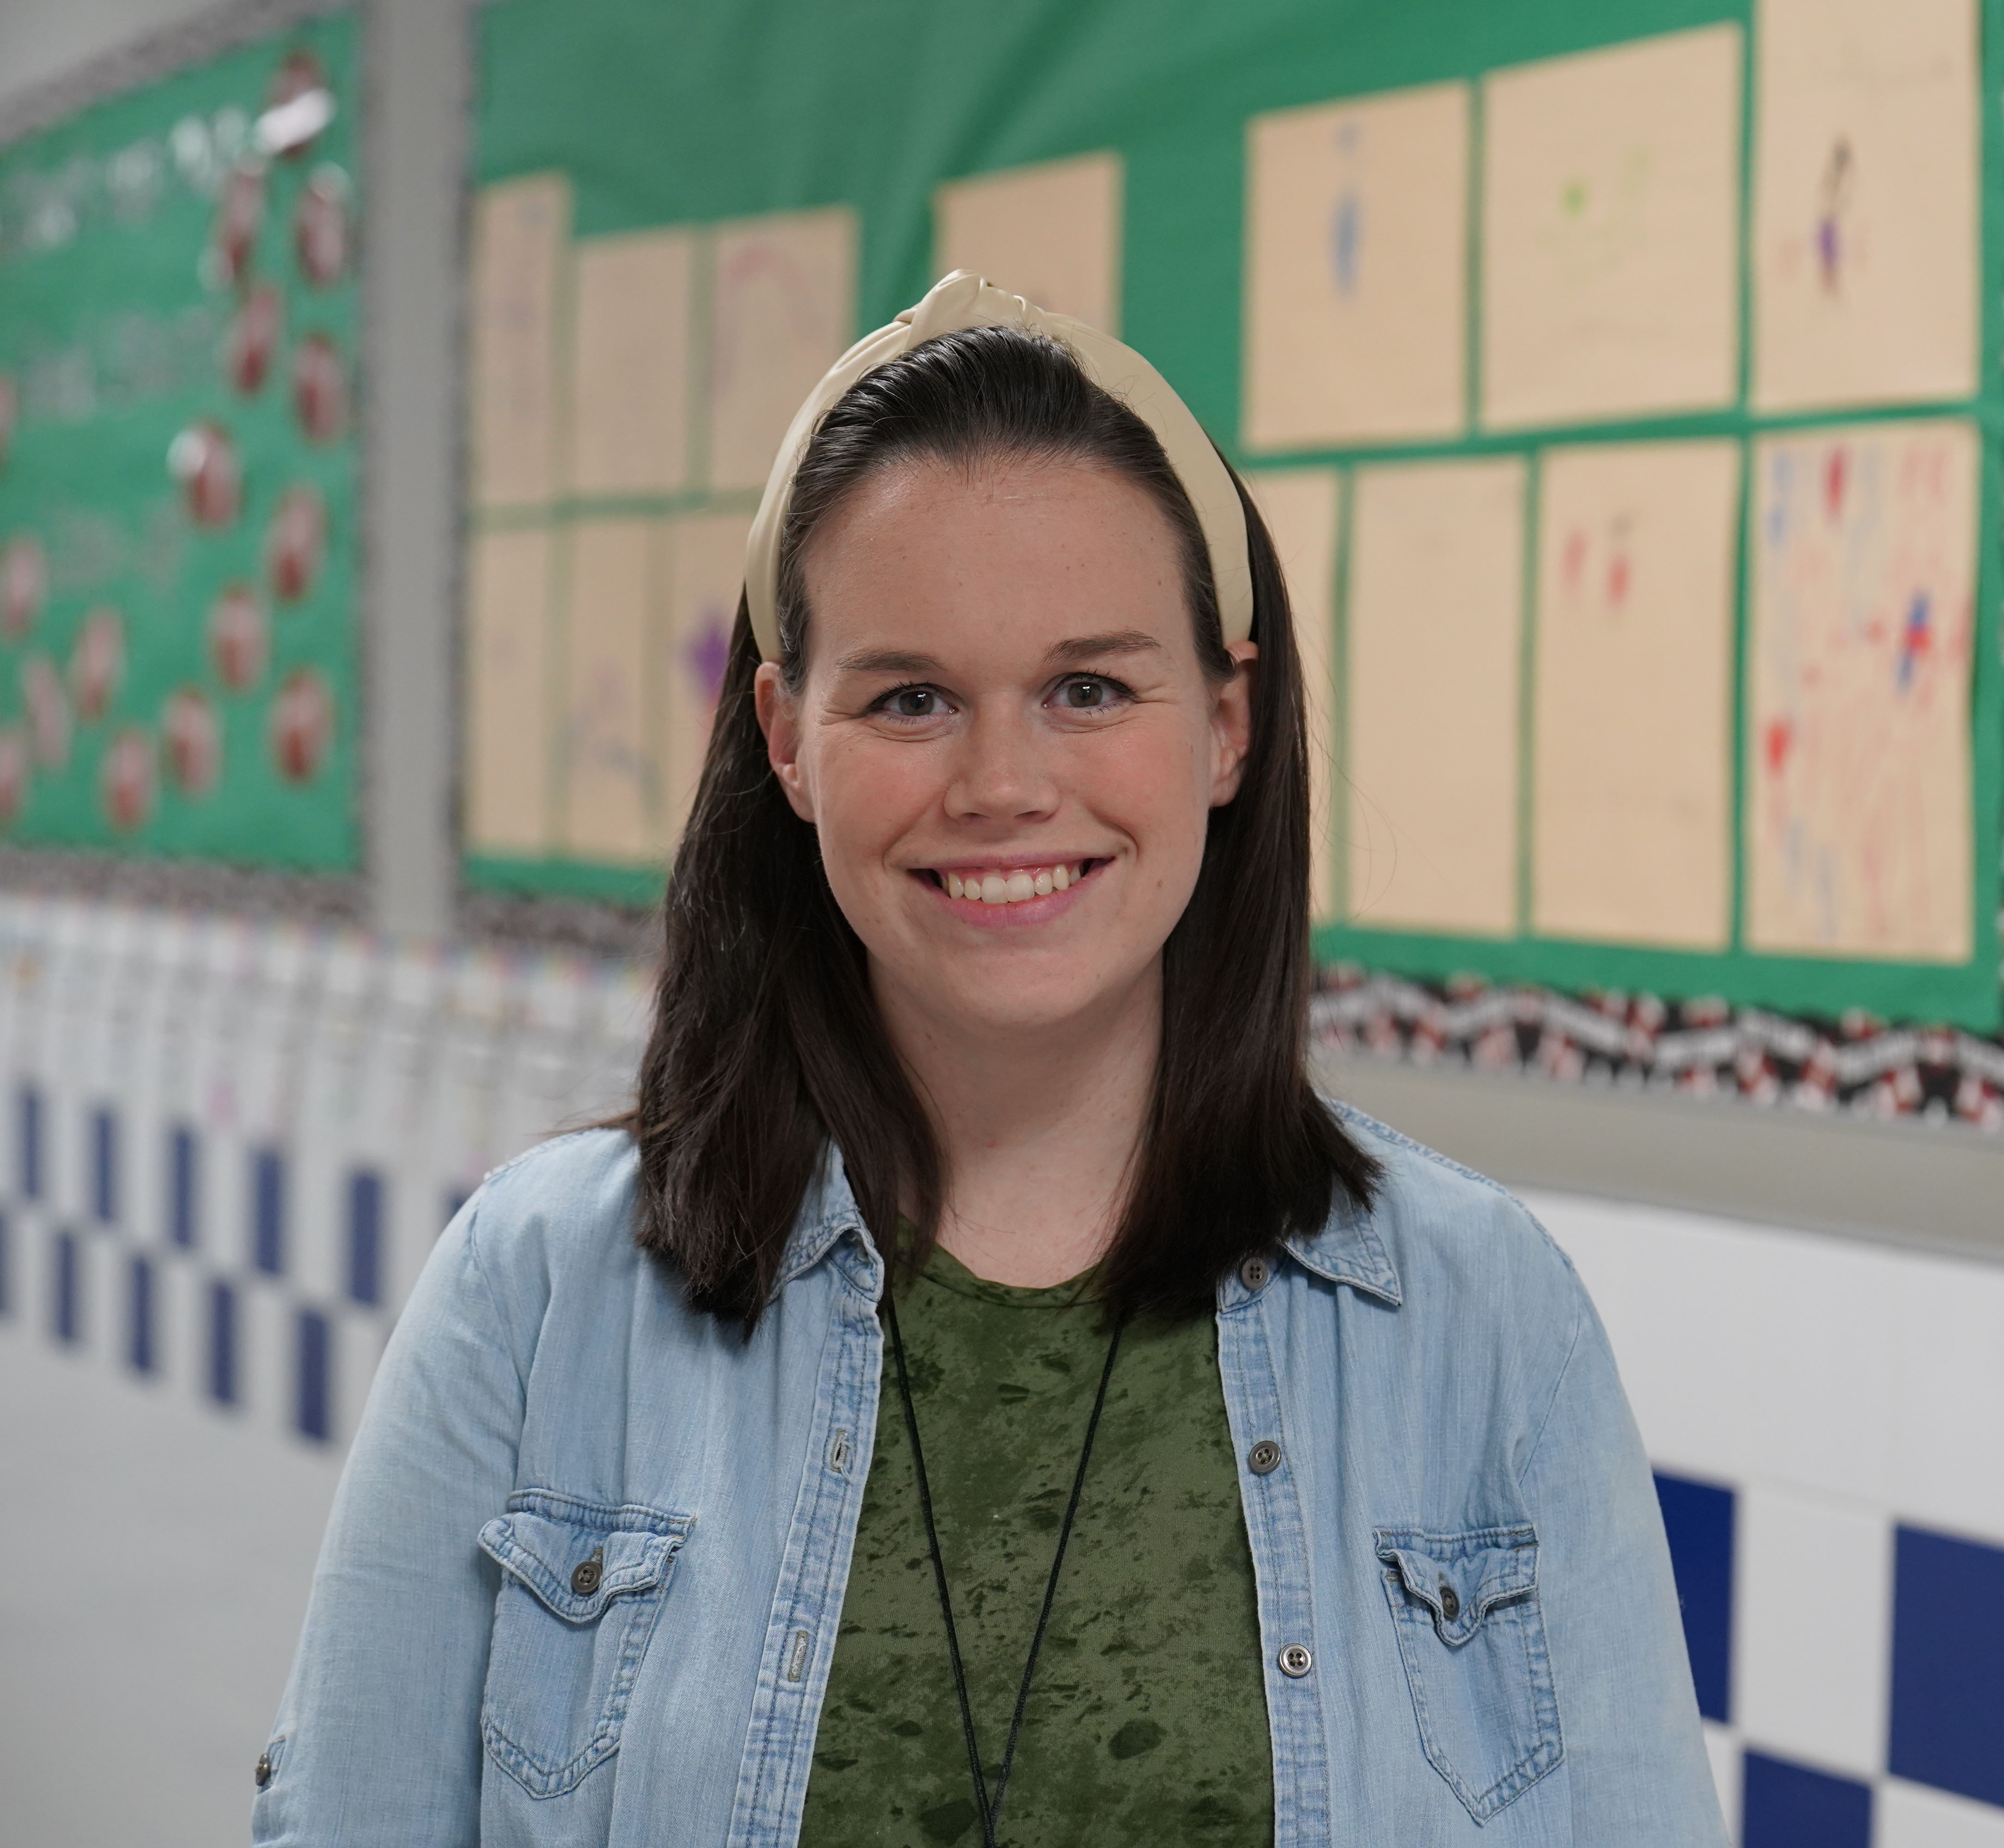 woman in a school hallway wearing a green shirt and denim shirt over it